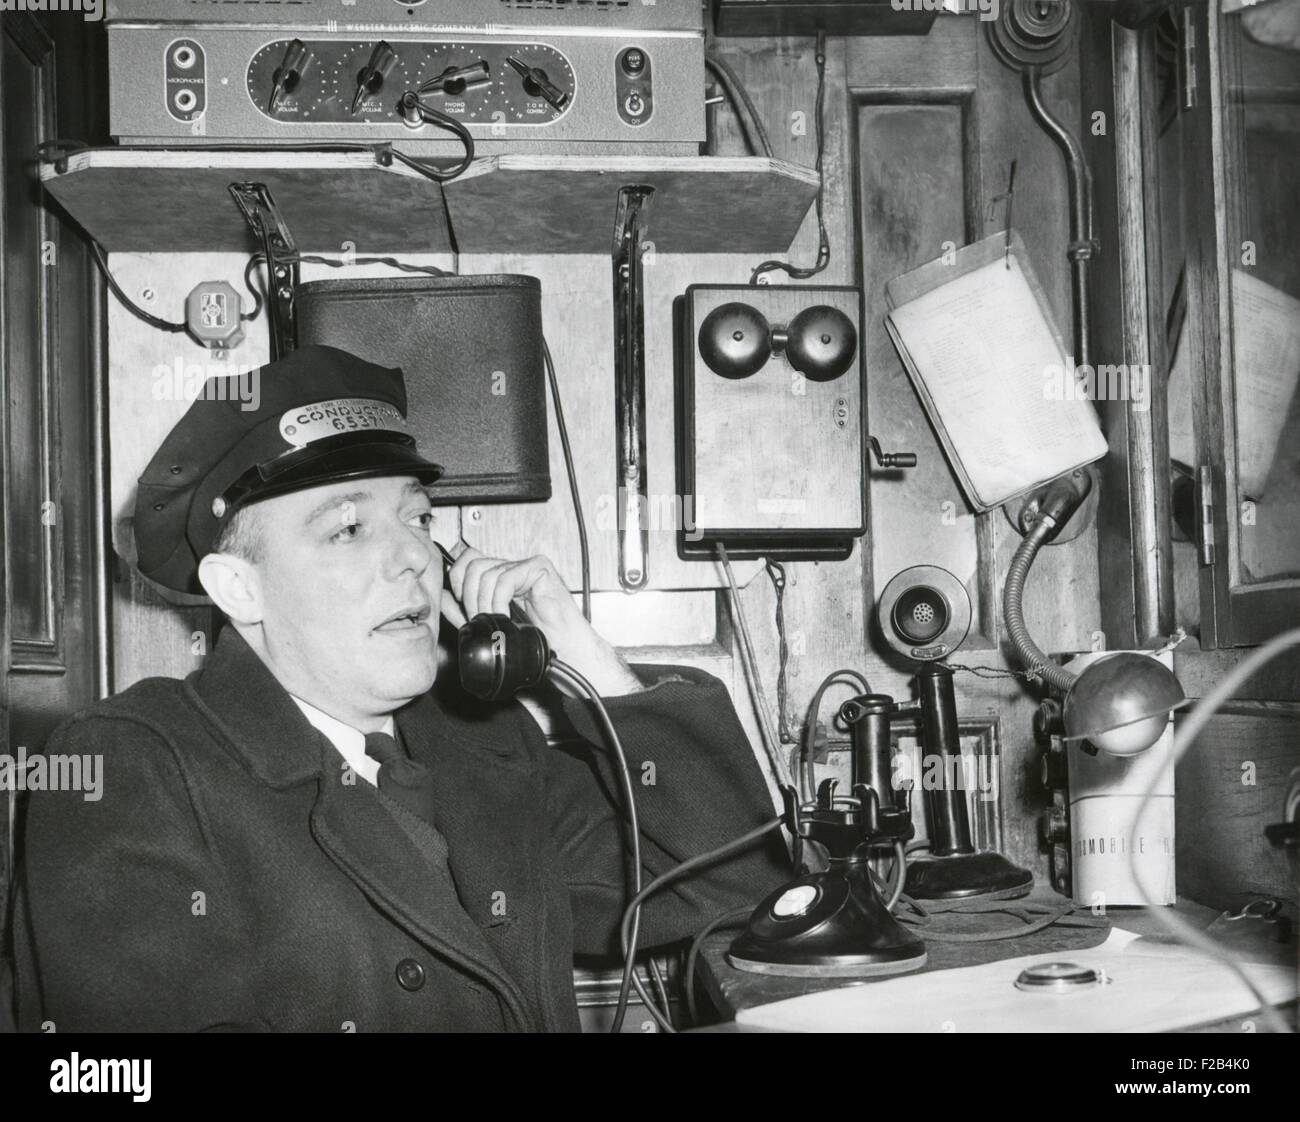 Railroad conductor uses an on board telephone to communicate with other parts of the train. Ca. 1930's - (BSLOC 2015 1 231) Stock Photo